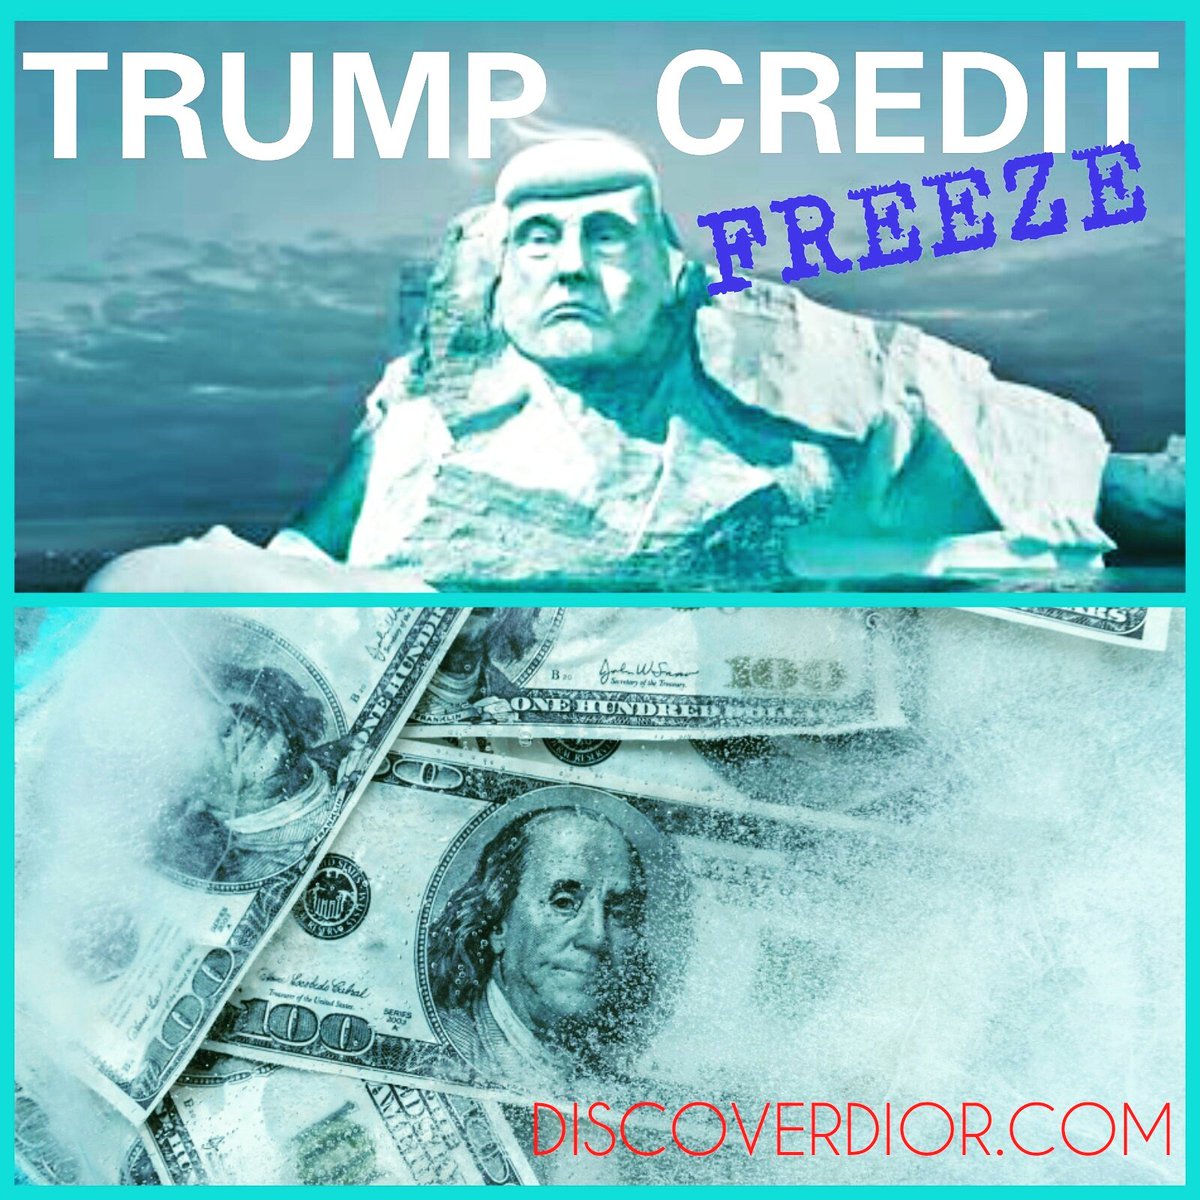 TRUMP CREDIT FREEZES ARE FREE. HERE'S WHY YOU MIGHT WANT ONE -  #Increasesales with #goodcredit!!🌏🗝📲
discoverdior.com

#Creditfreeze to protect #millennials from #identitytheft now free nationwide under new law. #Trumpeffect #MAGA #creditscore #creditcard #consumerdebt